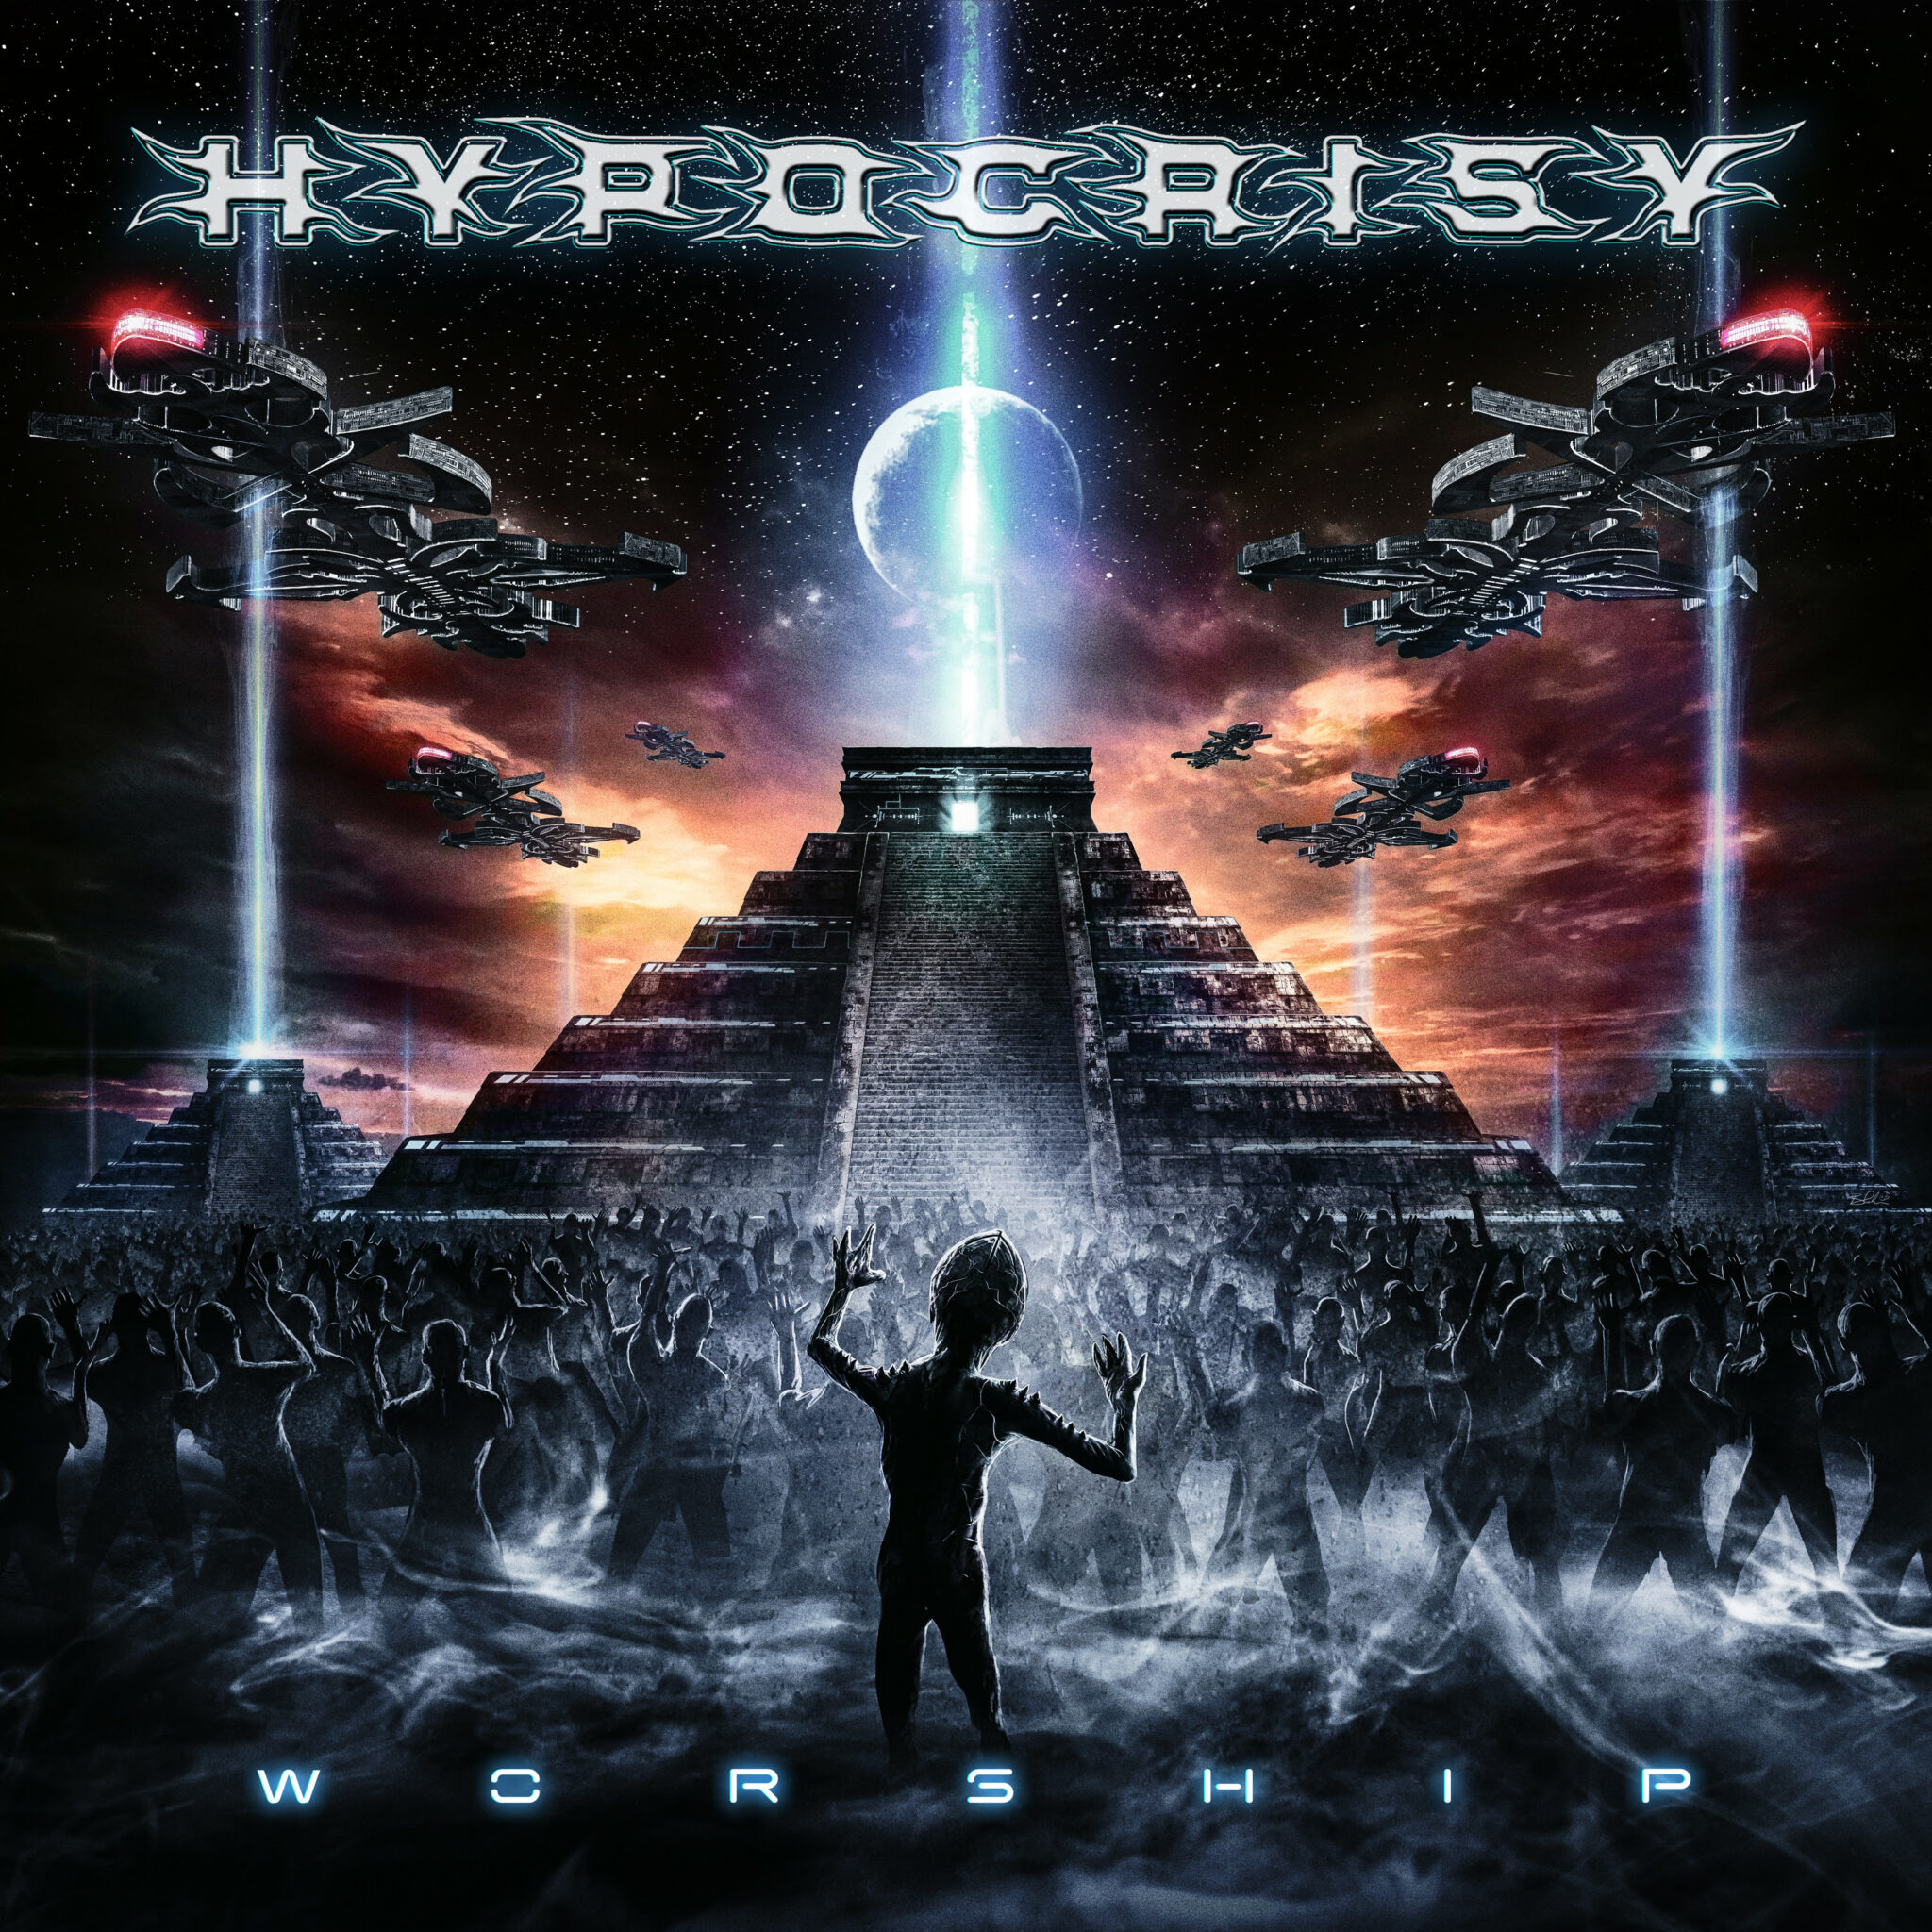 Hypocrisy announces new album "Worship" and drops first single